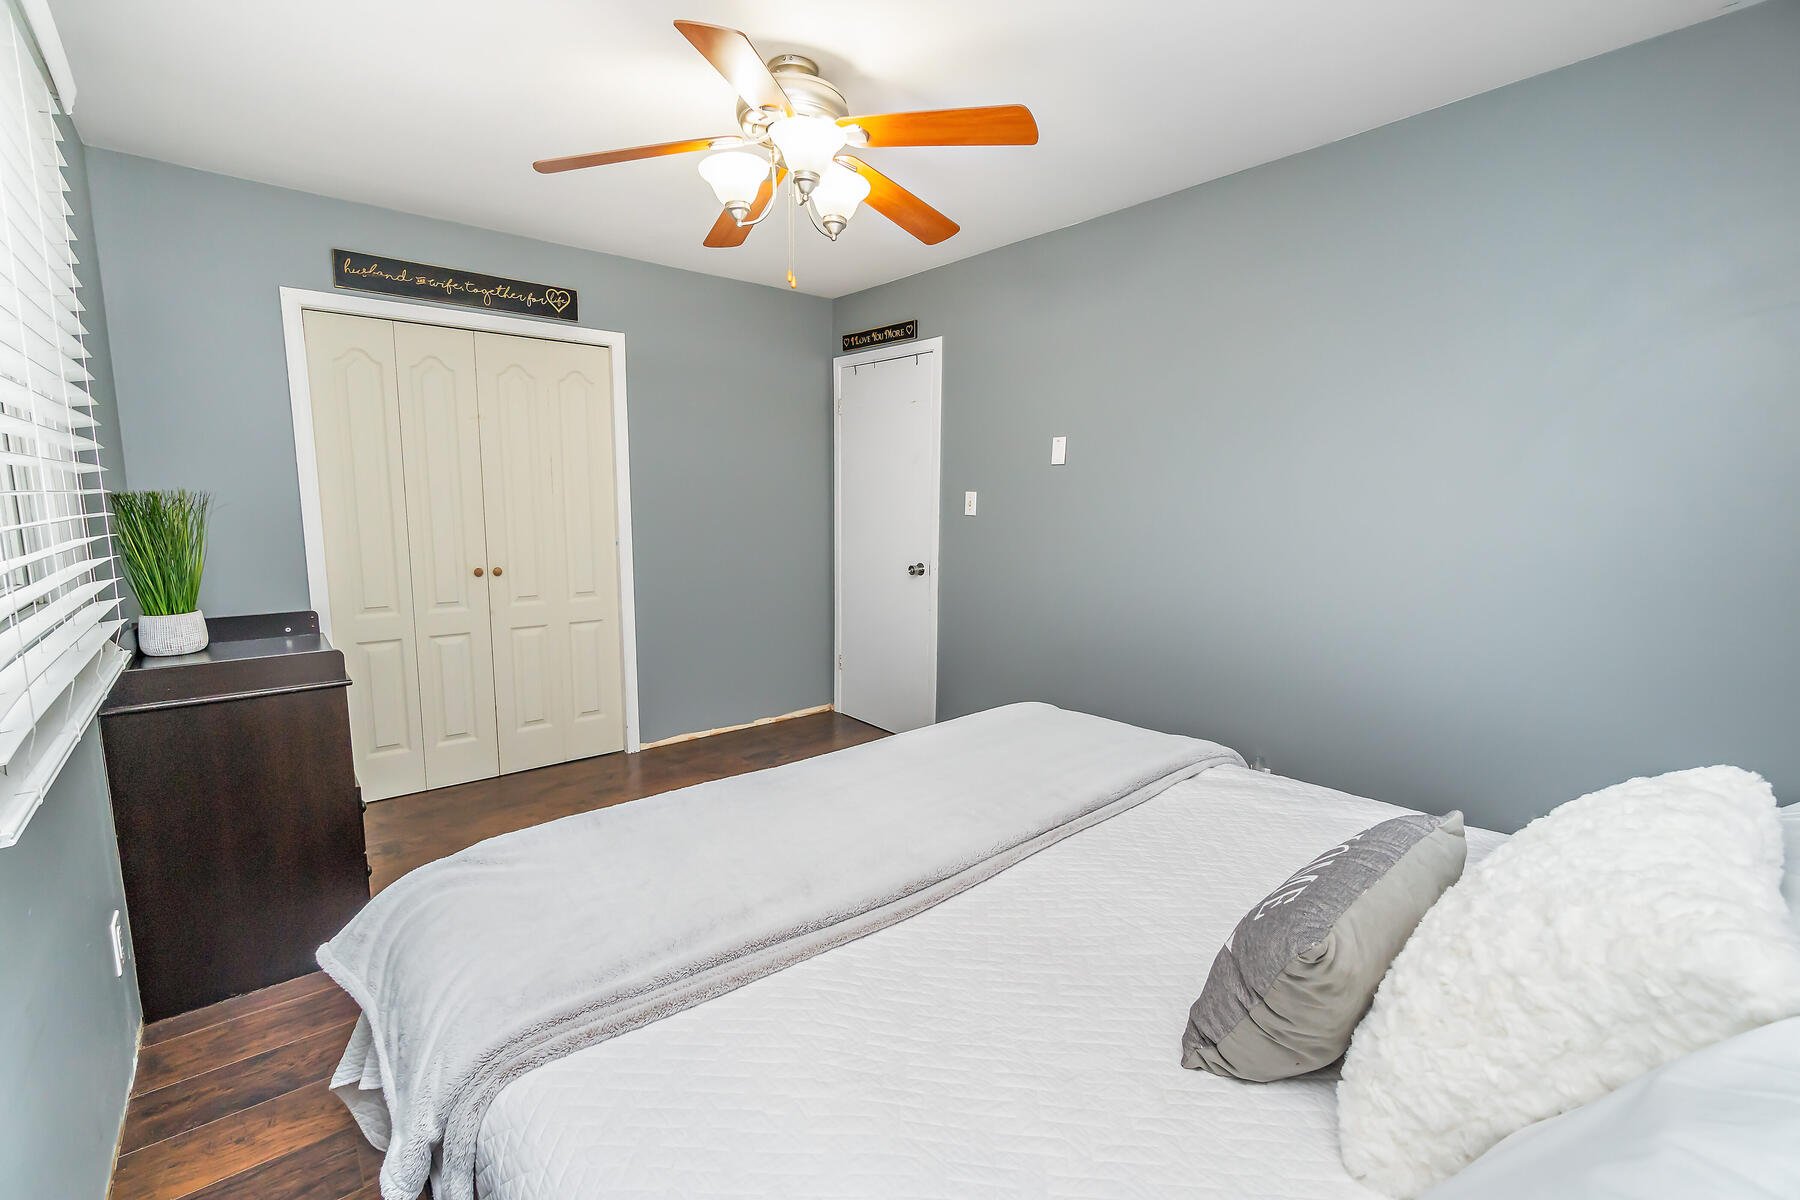 20 Mountainview Rd S Unit 30 Halton Hills ON L7G 4K3 Canada-025-032-Primary Bedroom-MLS_Size.jpg